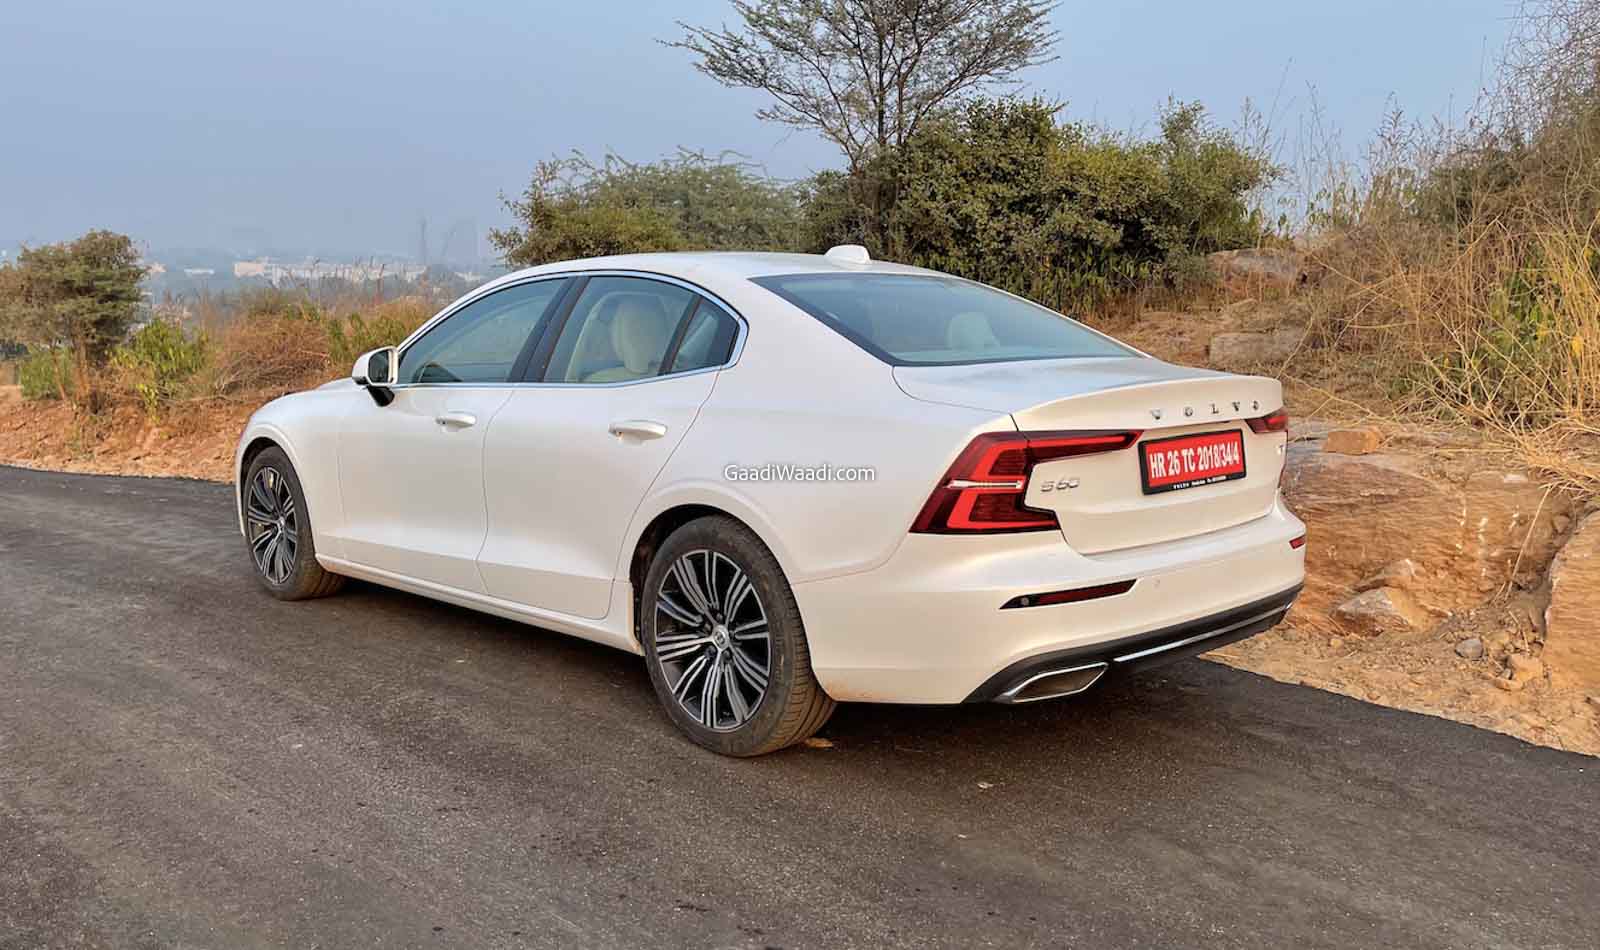 2021 Volvo S60 Launched In India, Priced At Rs. 45.90 Lakh